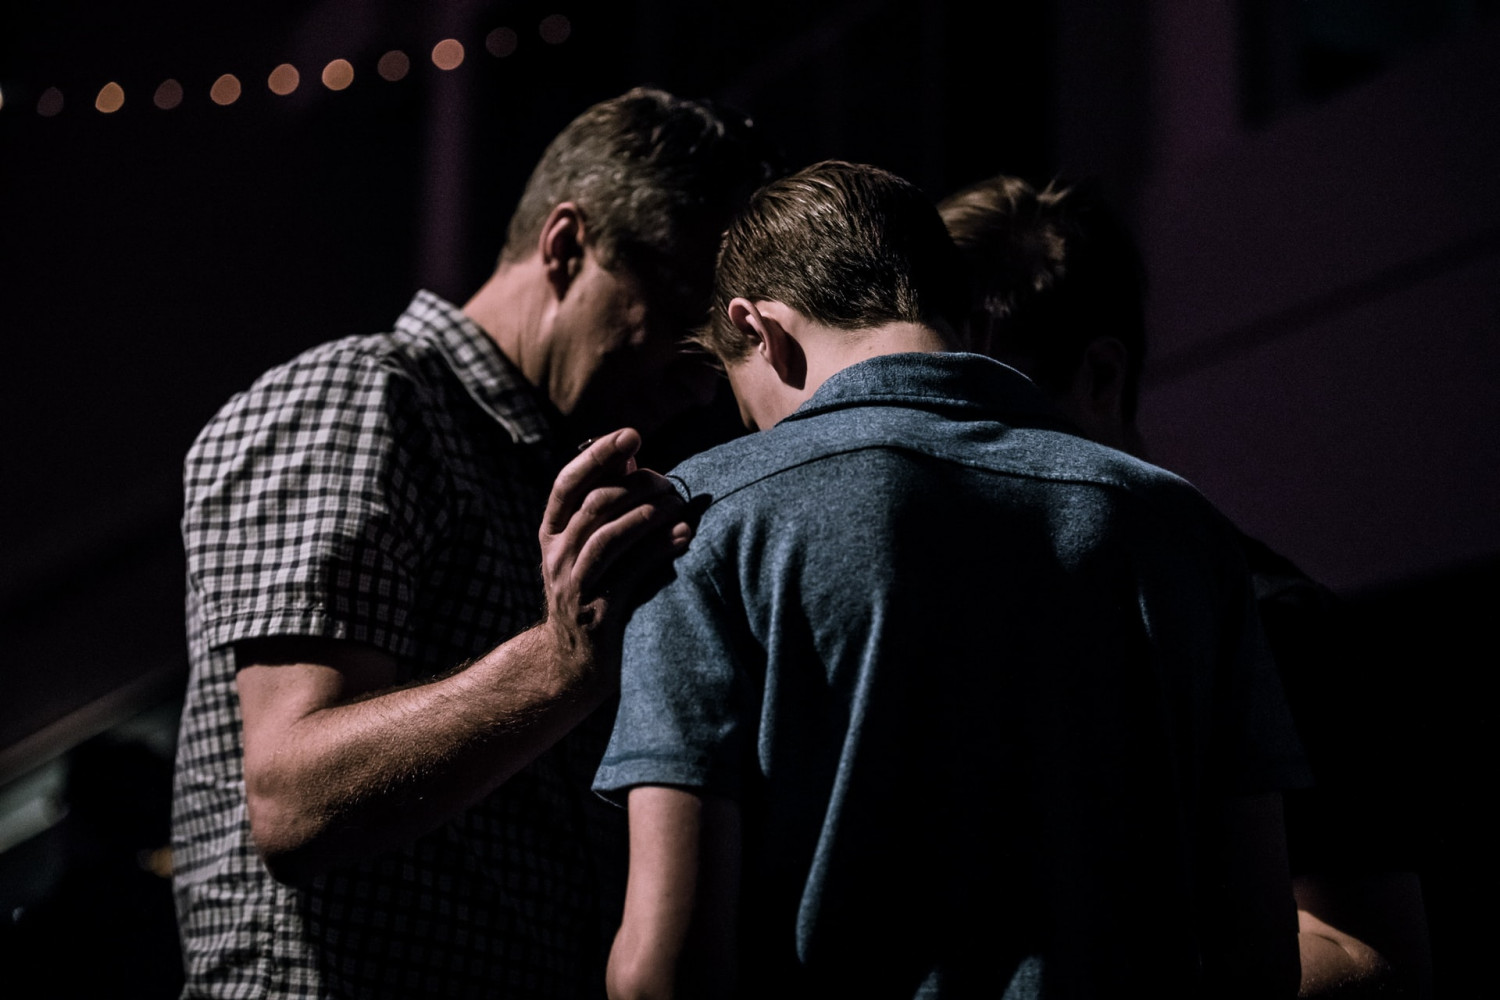 Local Ministry - Two men praying together